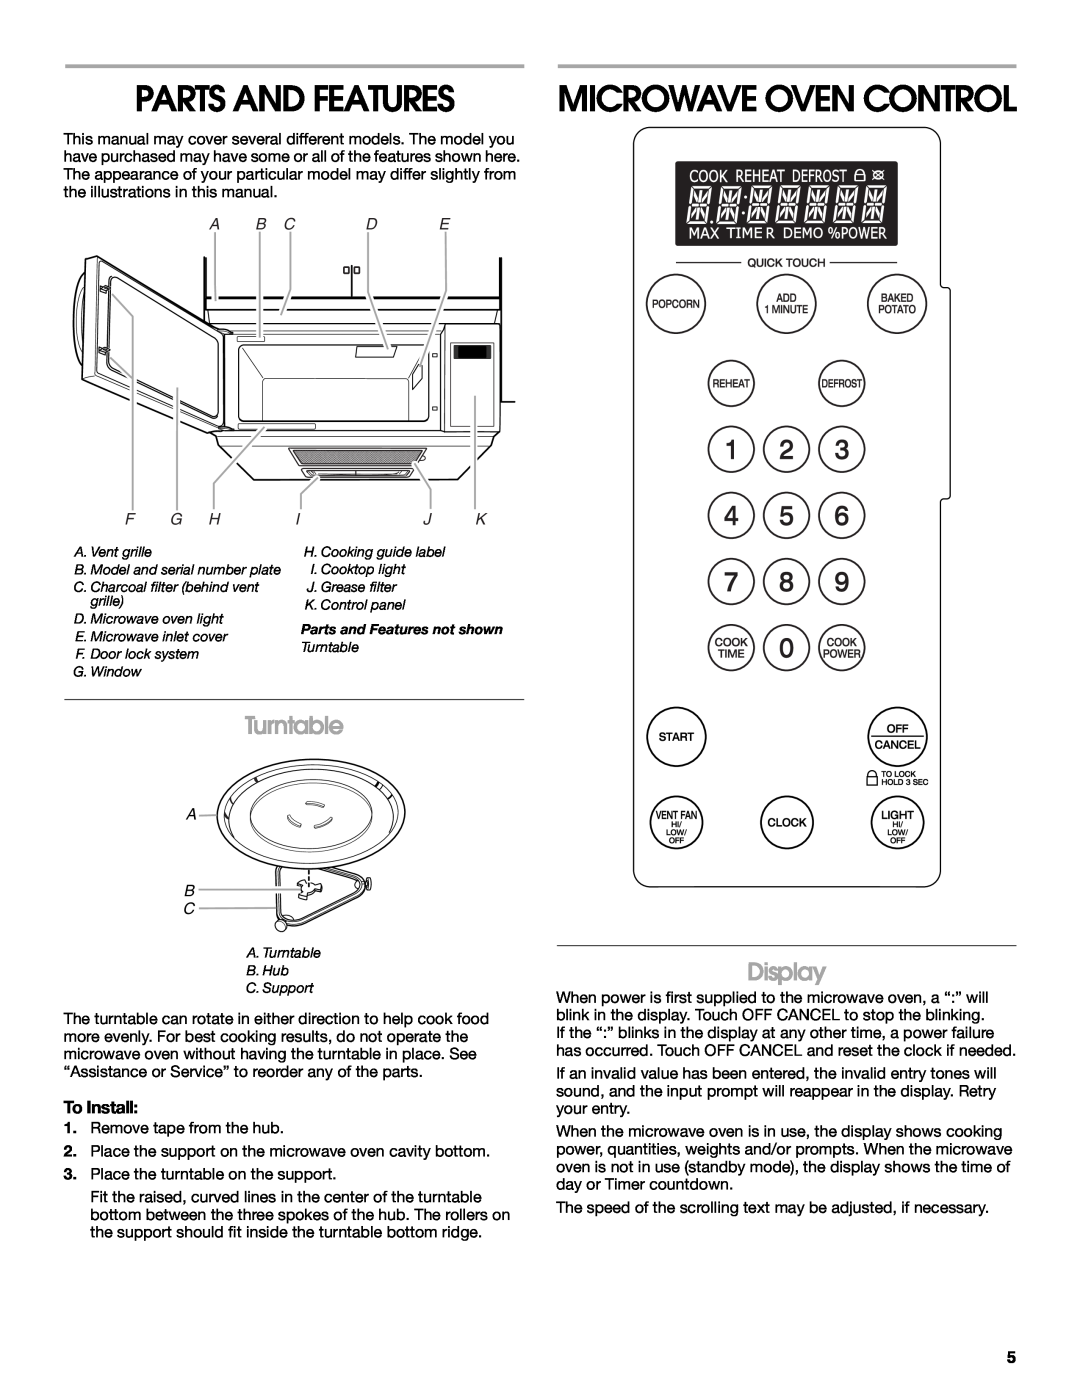 IKEA IMH15, IMH16 manual Parts And Features, Microwave Oven Control, Turntable, Display, To Install, A B C 